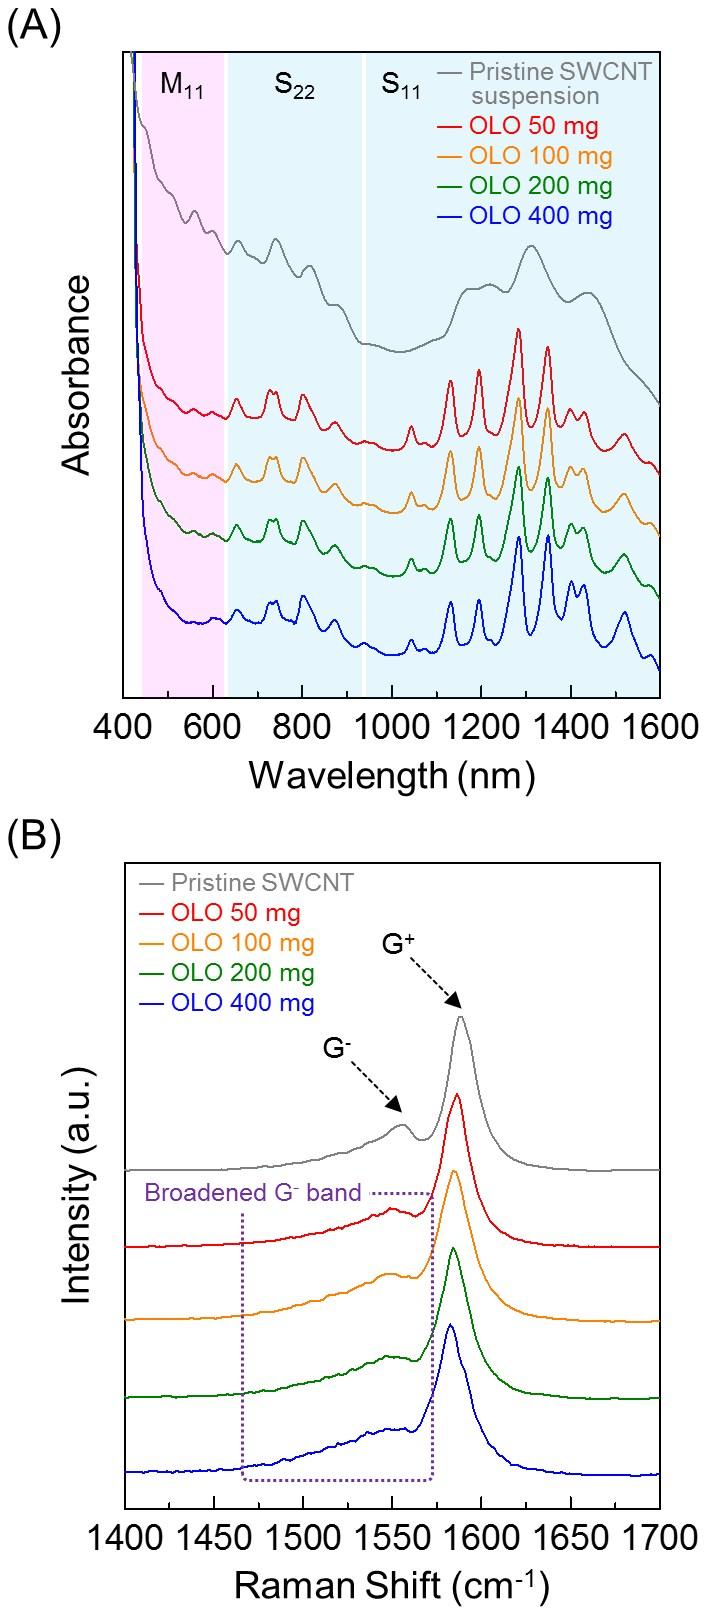 Figure S3. (A) UV-vis-NIR spectra of the supernatants of the SWCNT/OLO suspensions with PFO as a function of the initial OLO content in the PFO (0.5 mg ml 1 )-dissolved SWCNT (1 mg)/olo suspension.